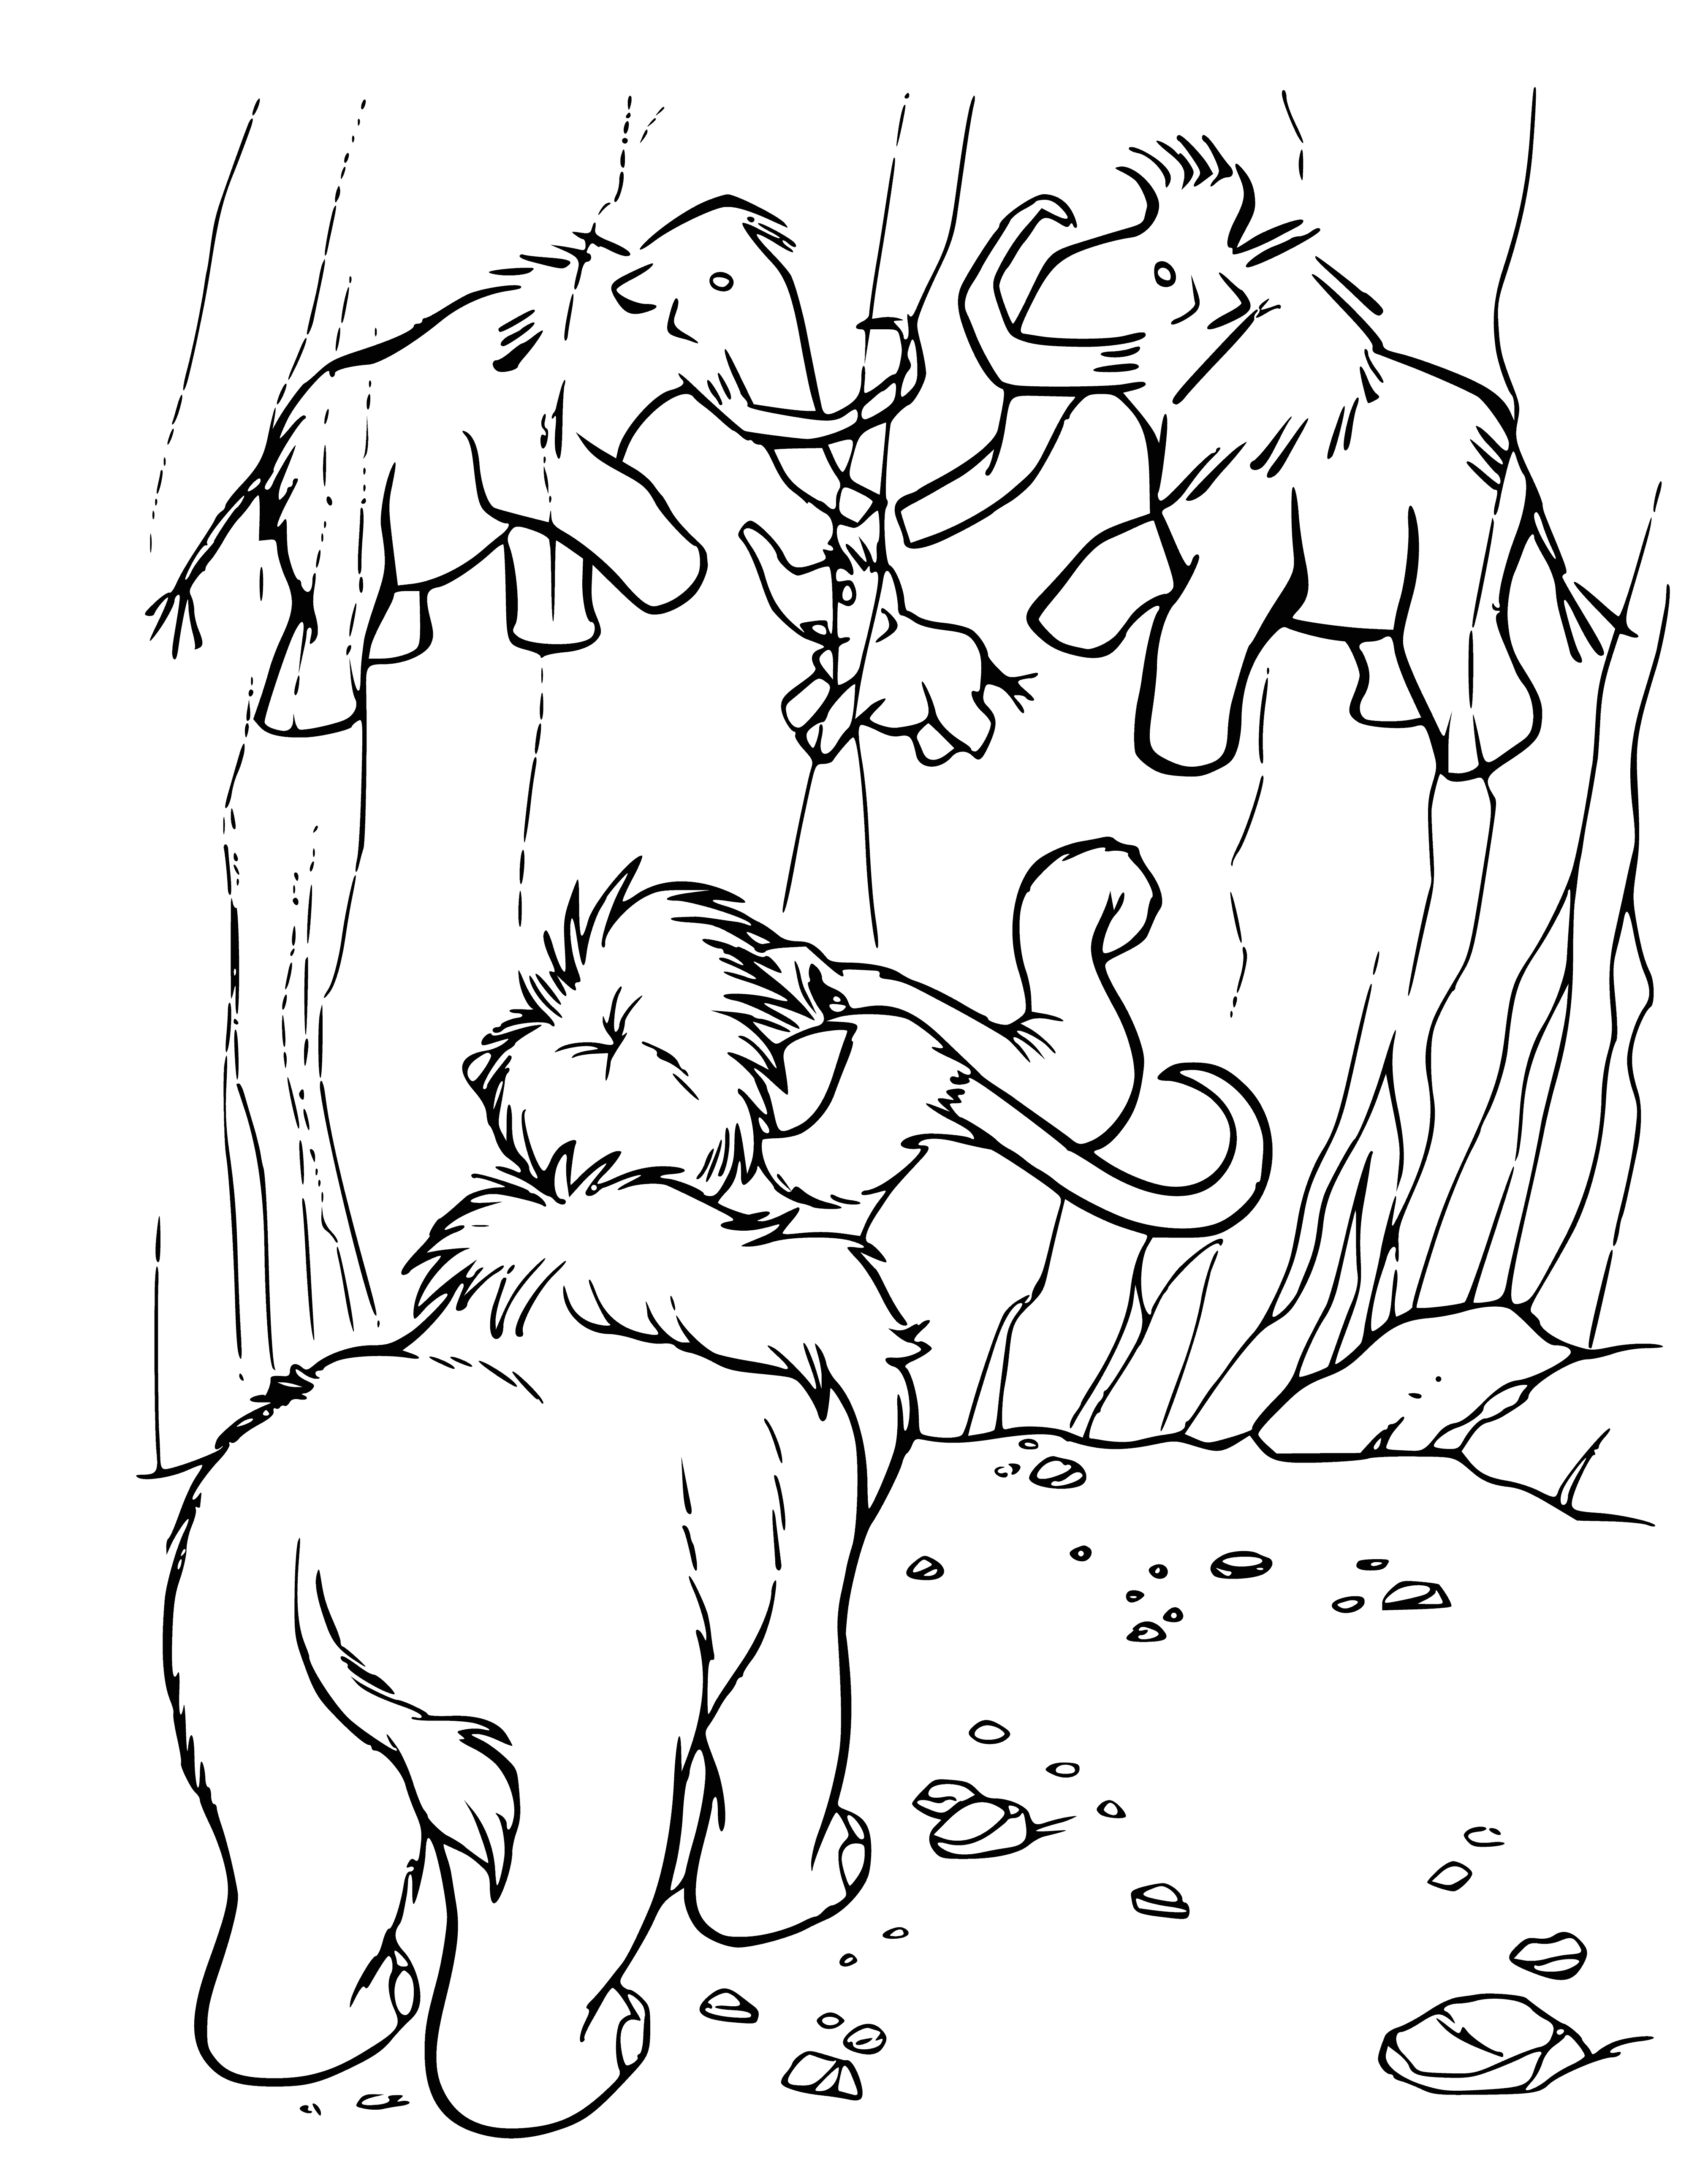 Mammoth Ellie coloring page